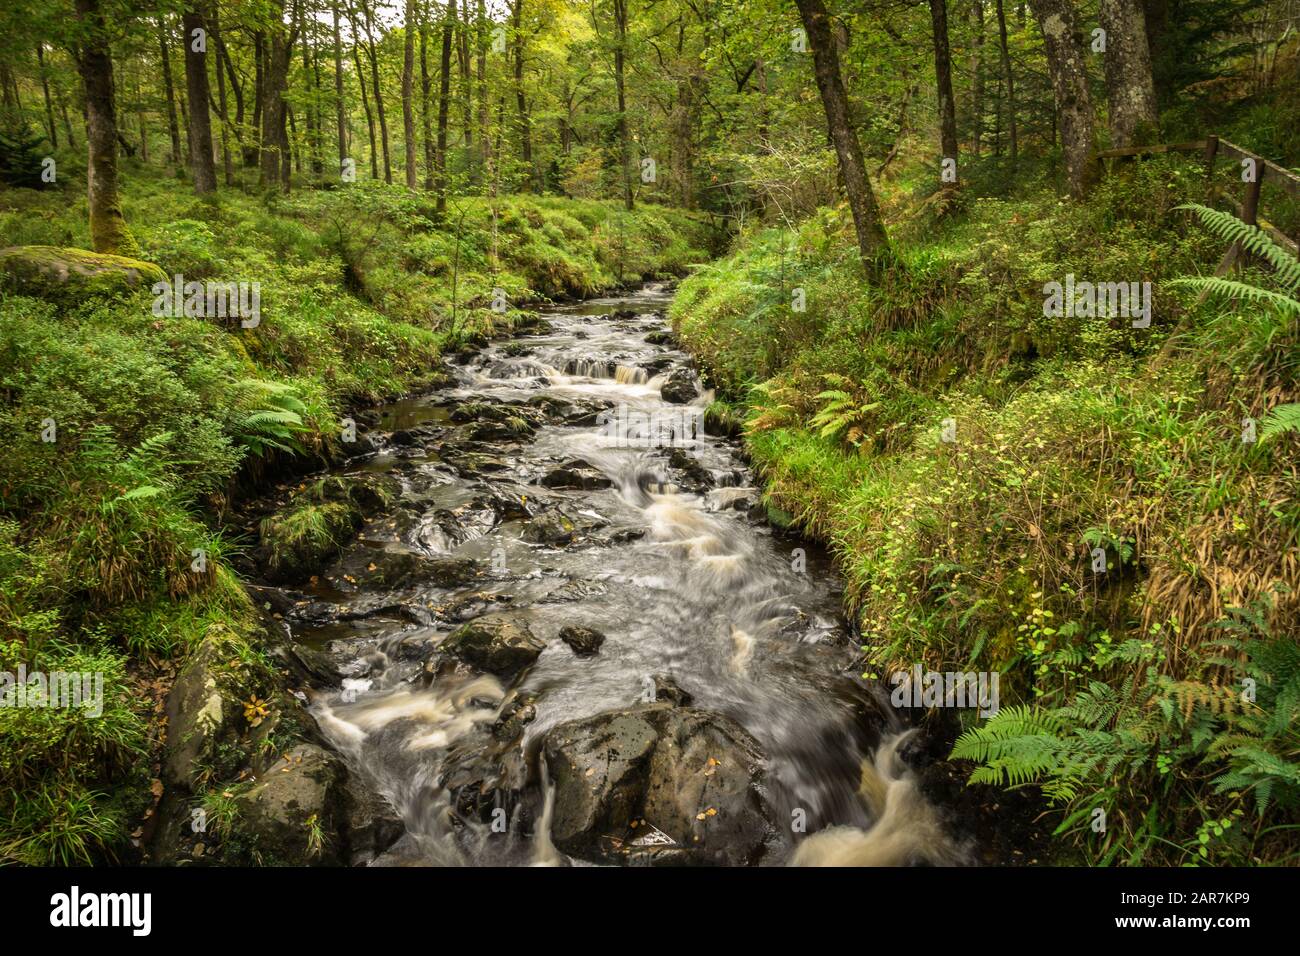 A river runs over rocks through a lush green forest in Queen Elizabeth Forest Park Stock Photo